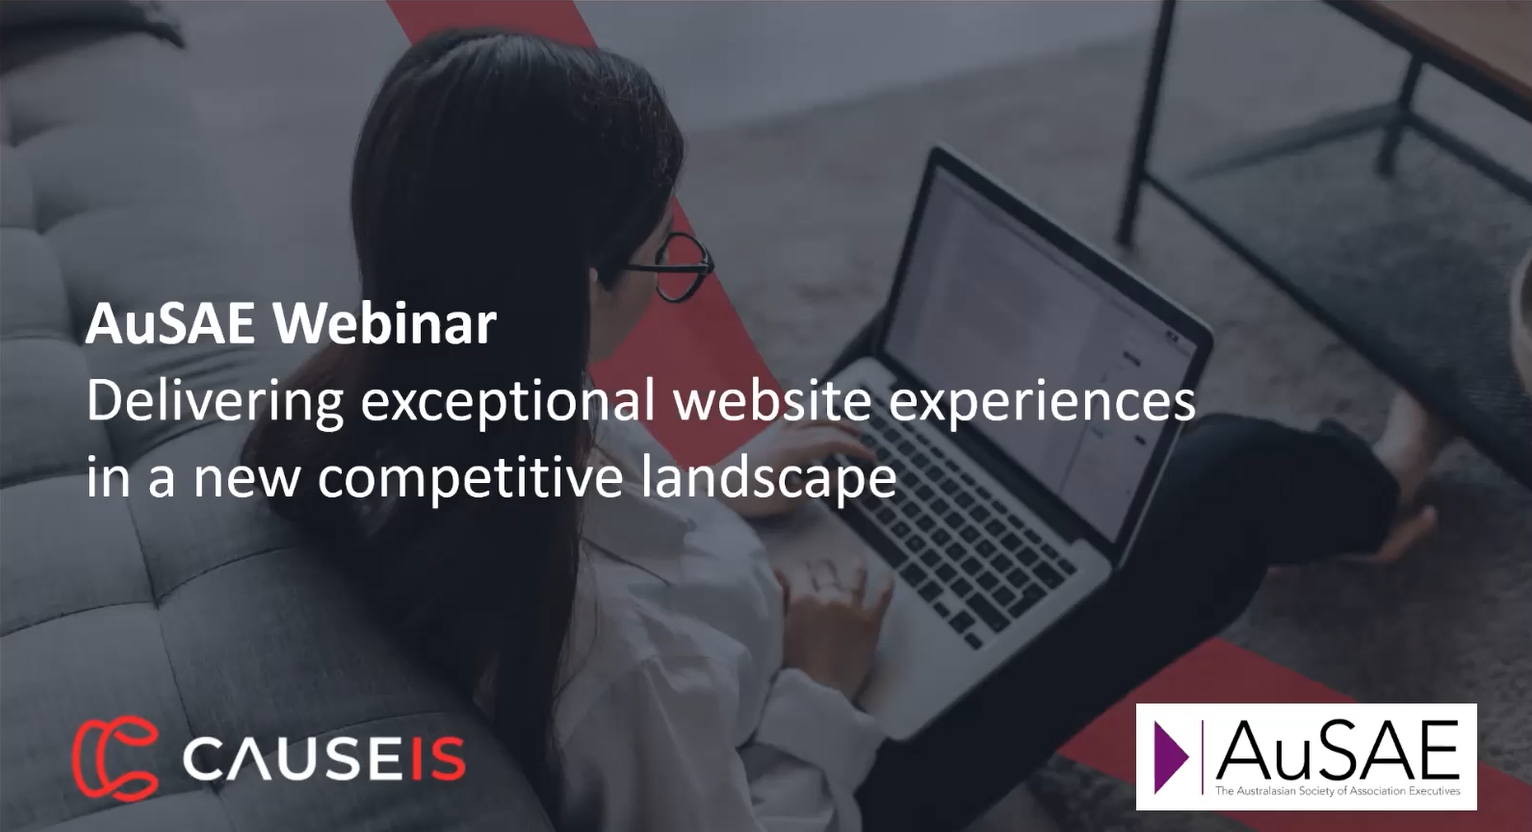 AuSAE Webinar - Delivering Exceptional Website Experiences in a New Competitive Landscape